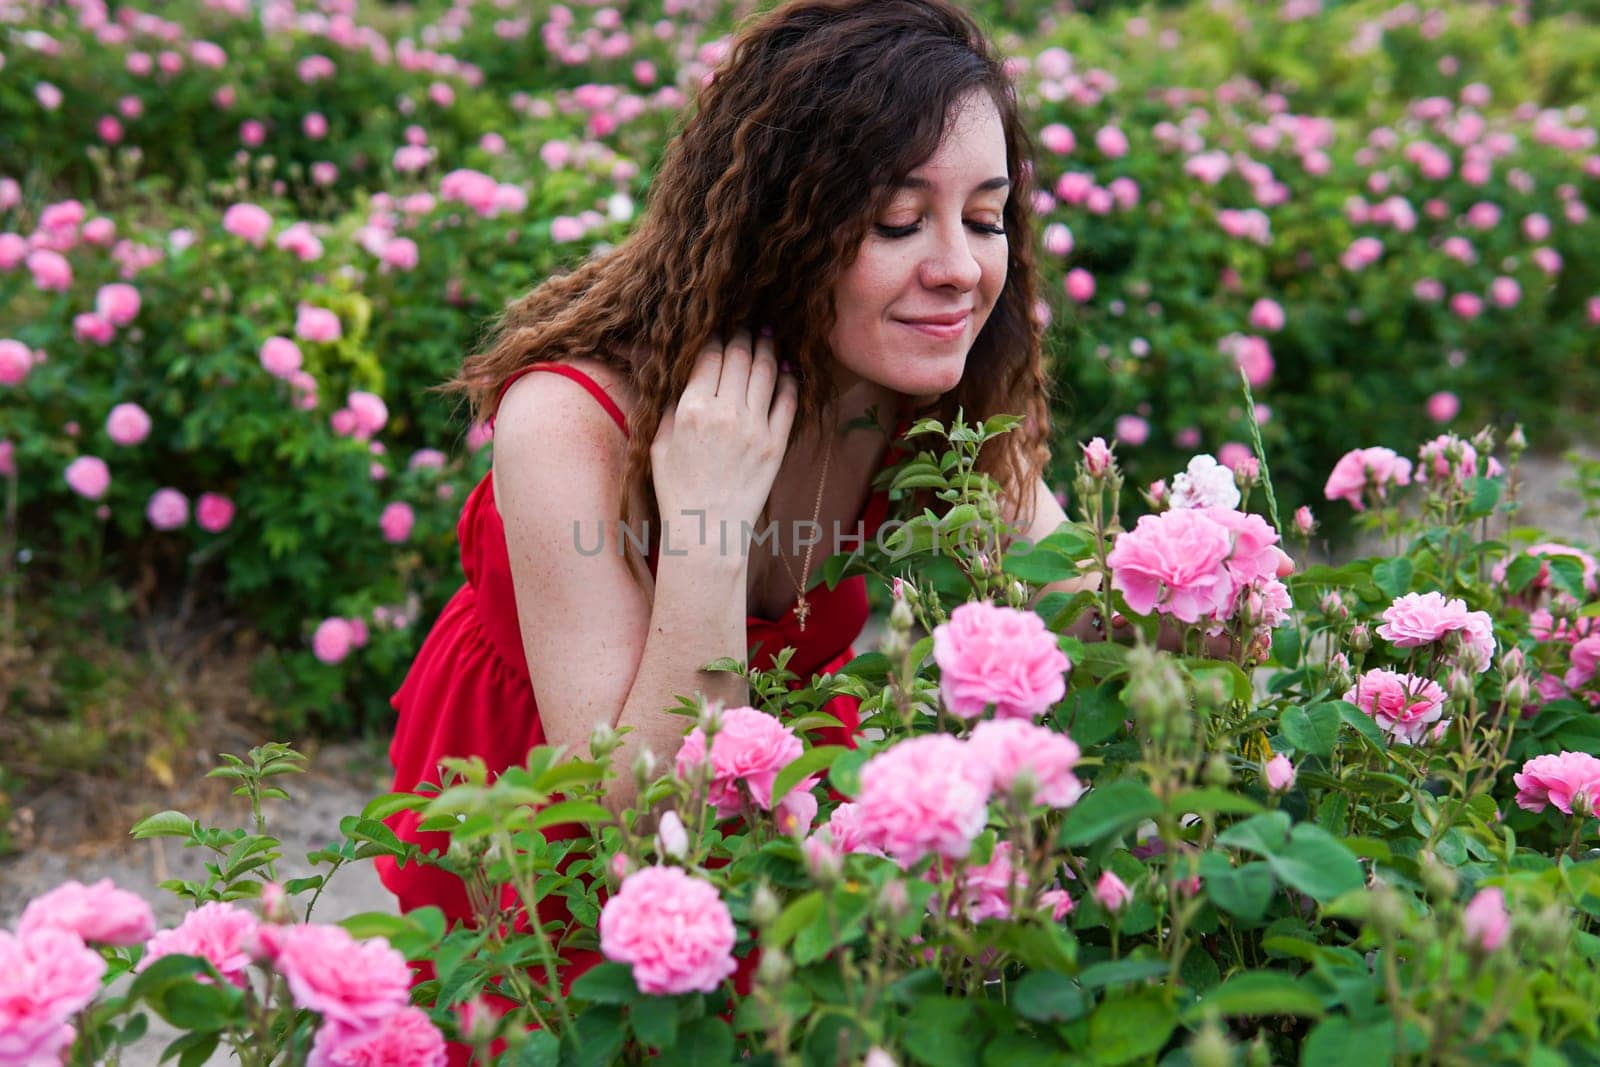 Beautiful woman in dress on a field of blossoming roses